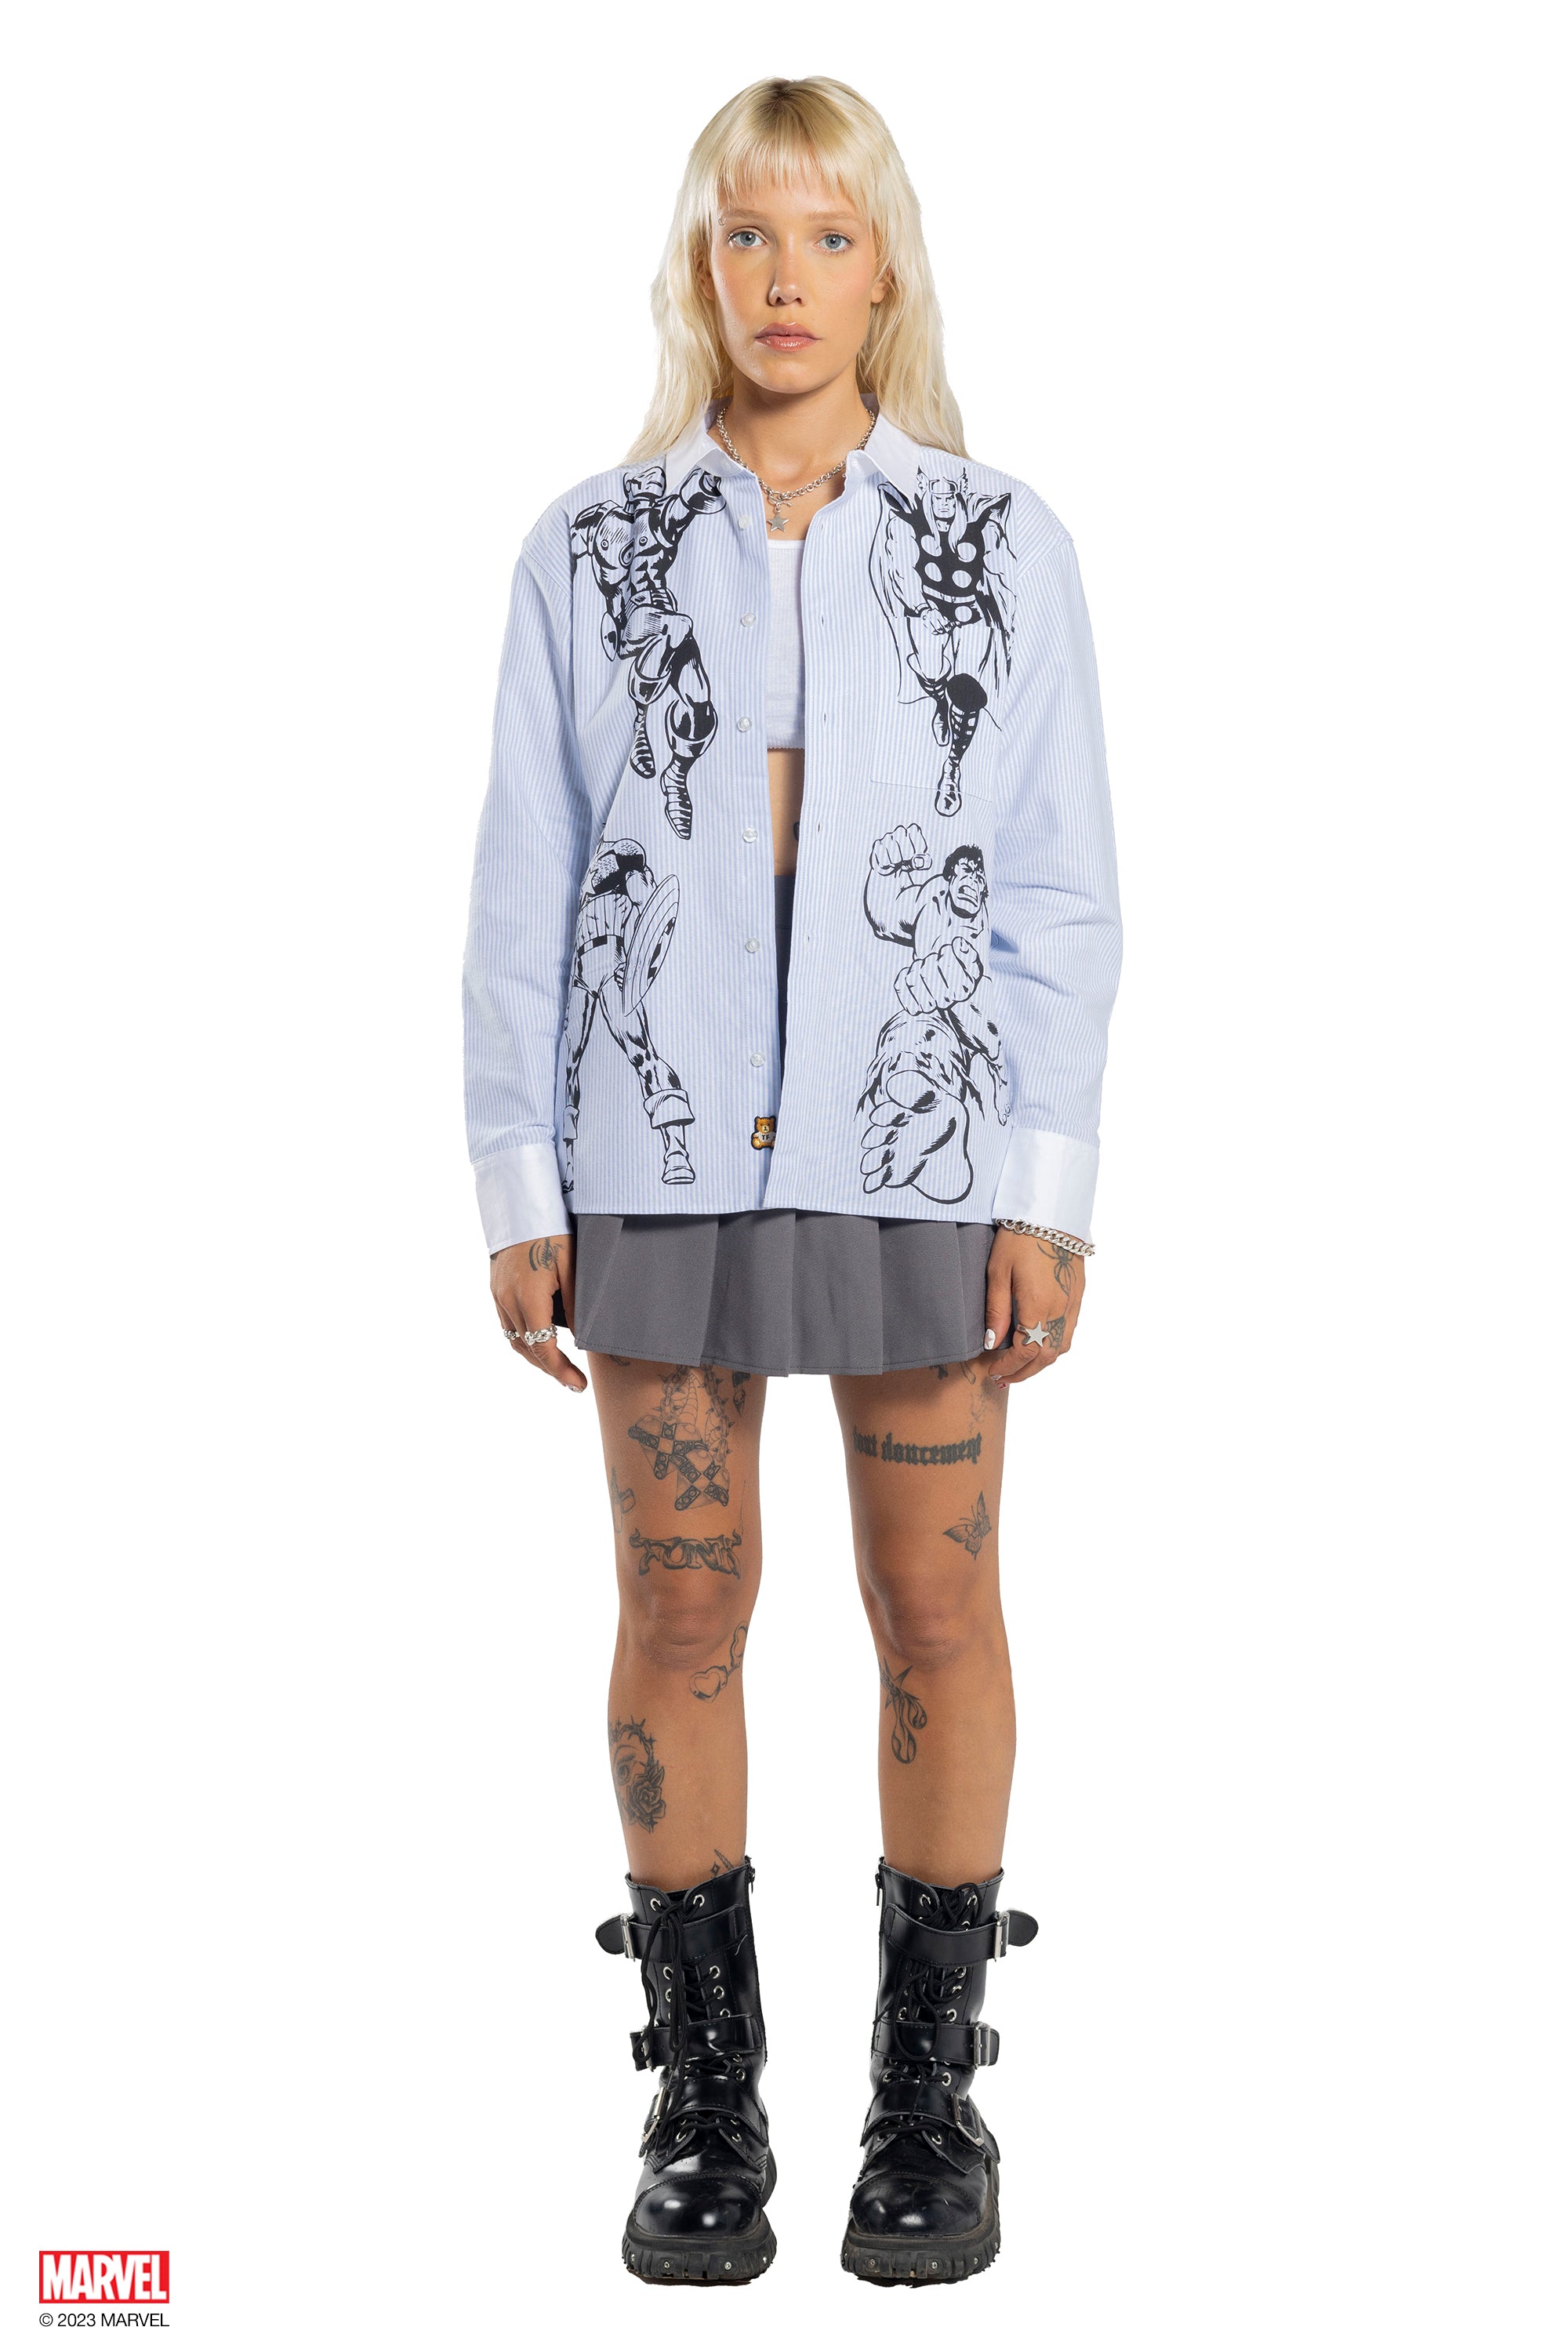 TF x Marvel Button Up